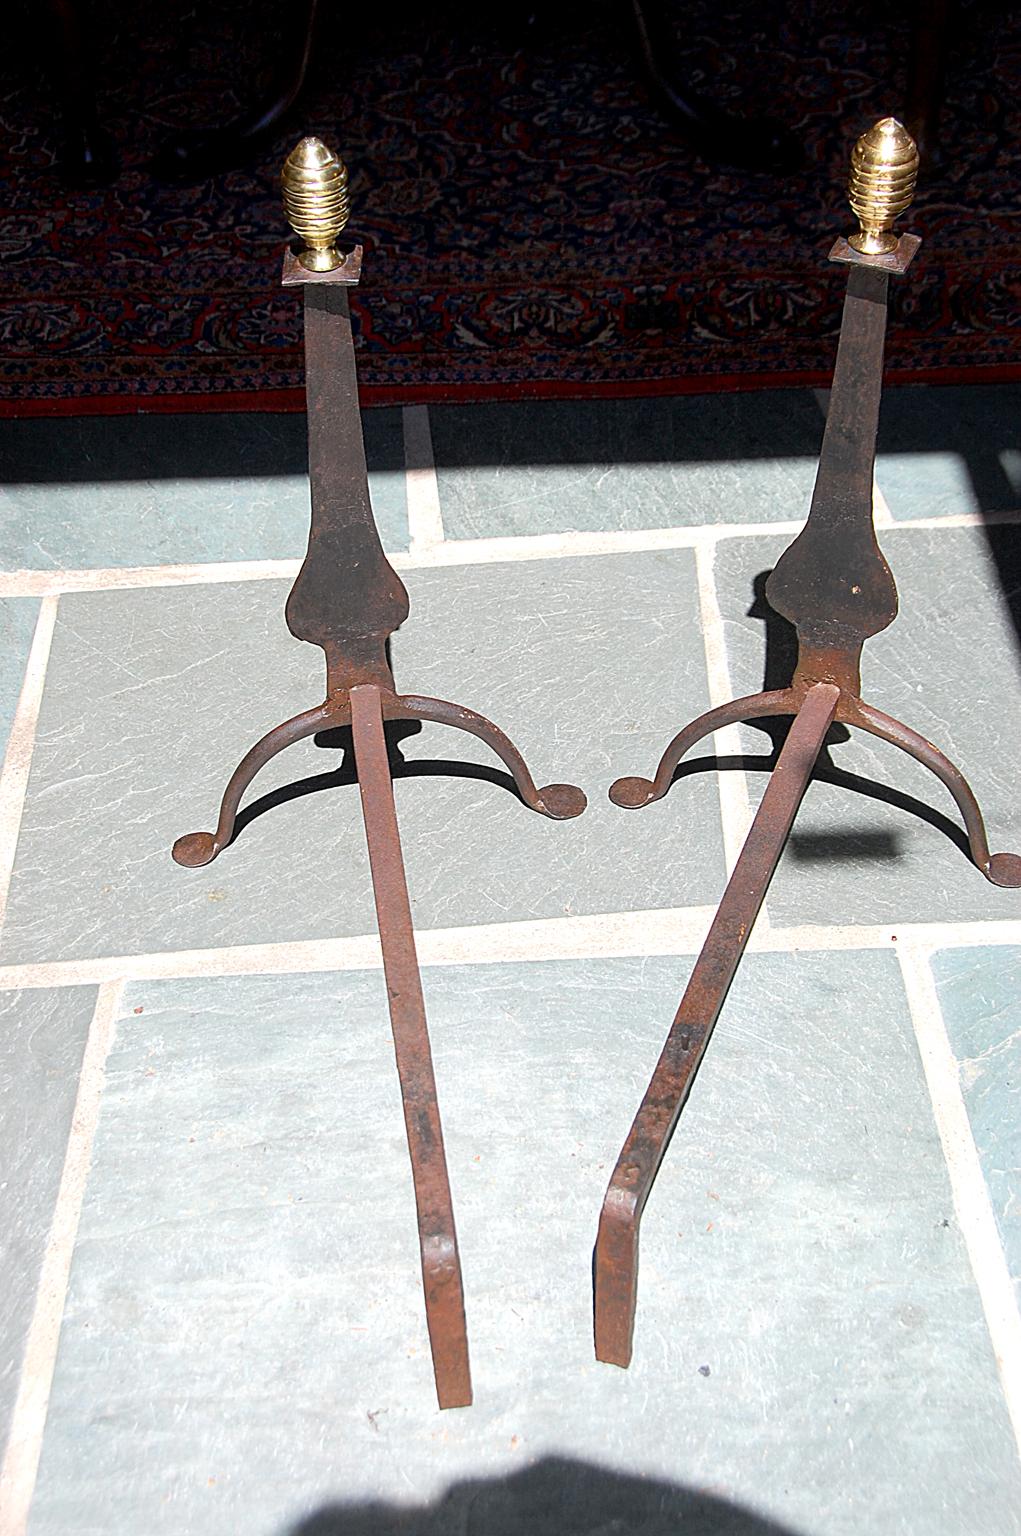 American 18th century pair of wrought iron knife blade andirons surmounted with cast brass beehive finials. These hand wrought 20 inch andirons exhibit the hammer marks which were integral to shaping these simple, yet elegant log holders. The cast